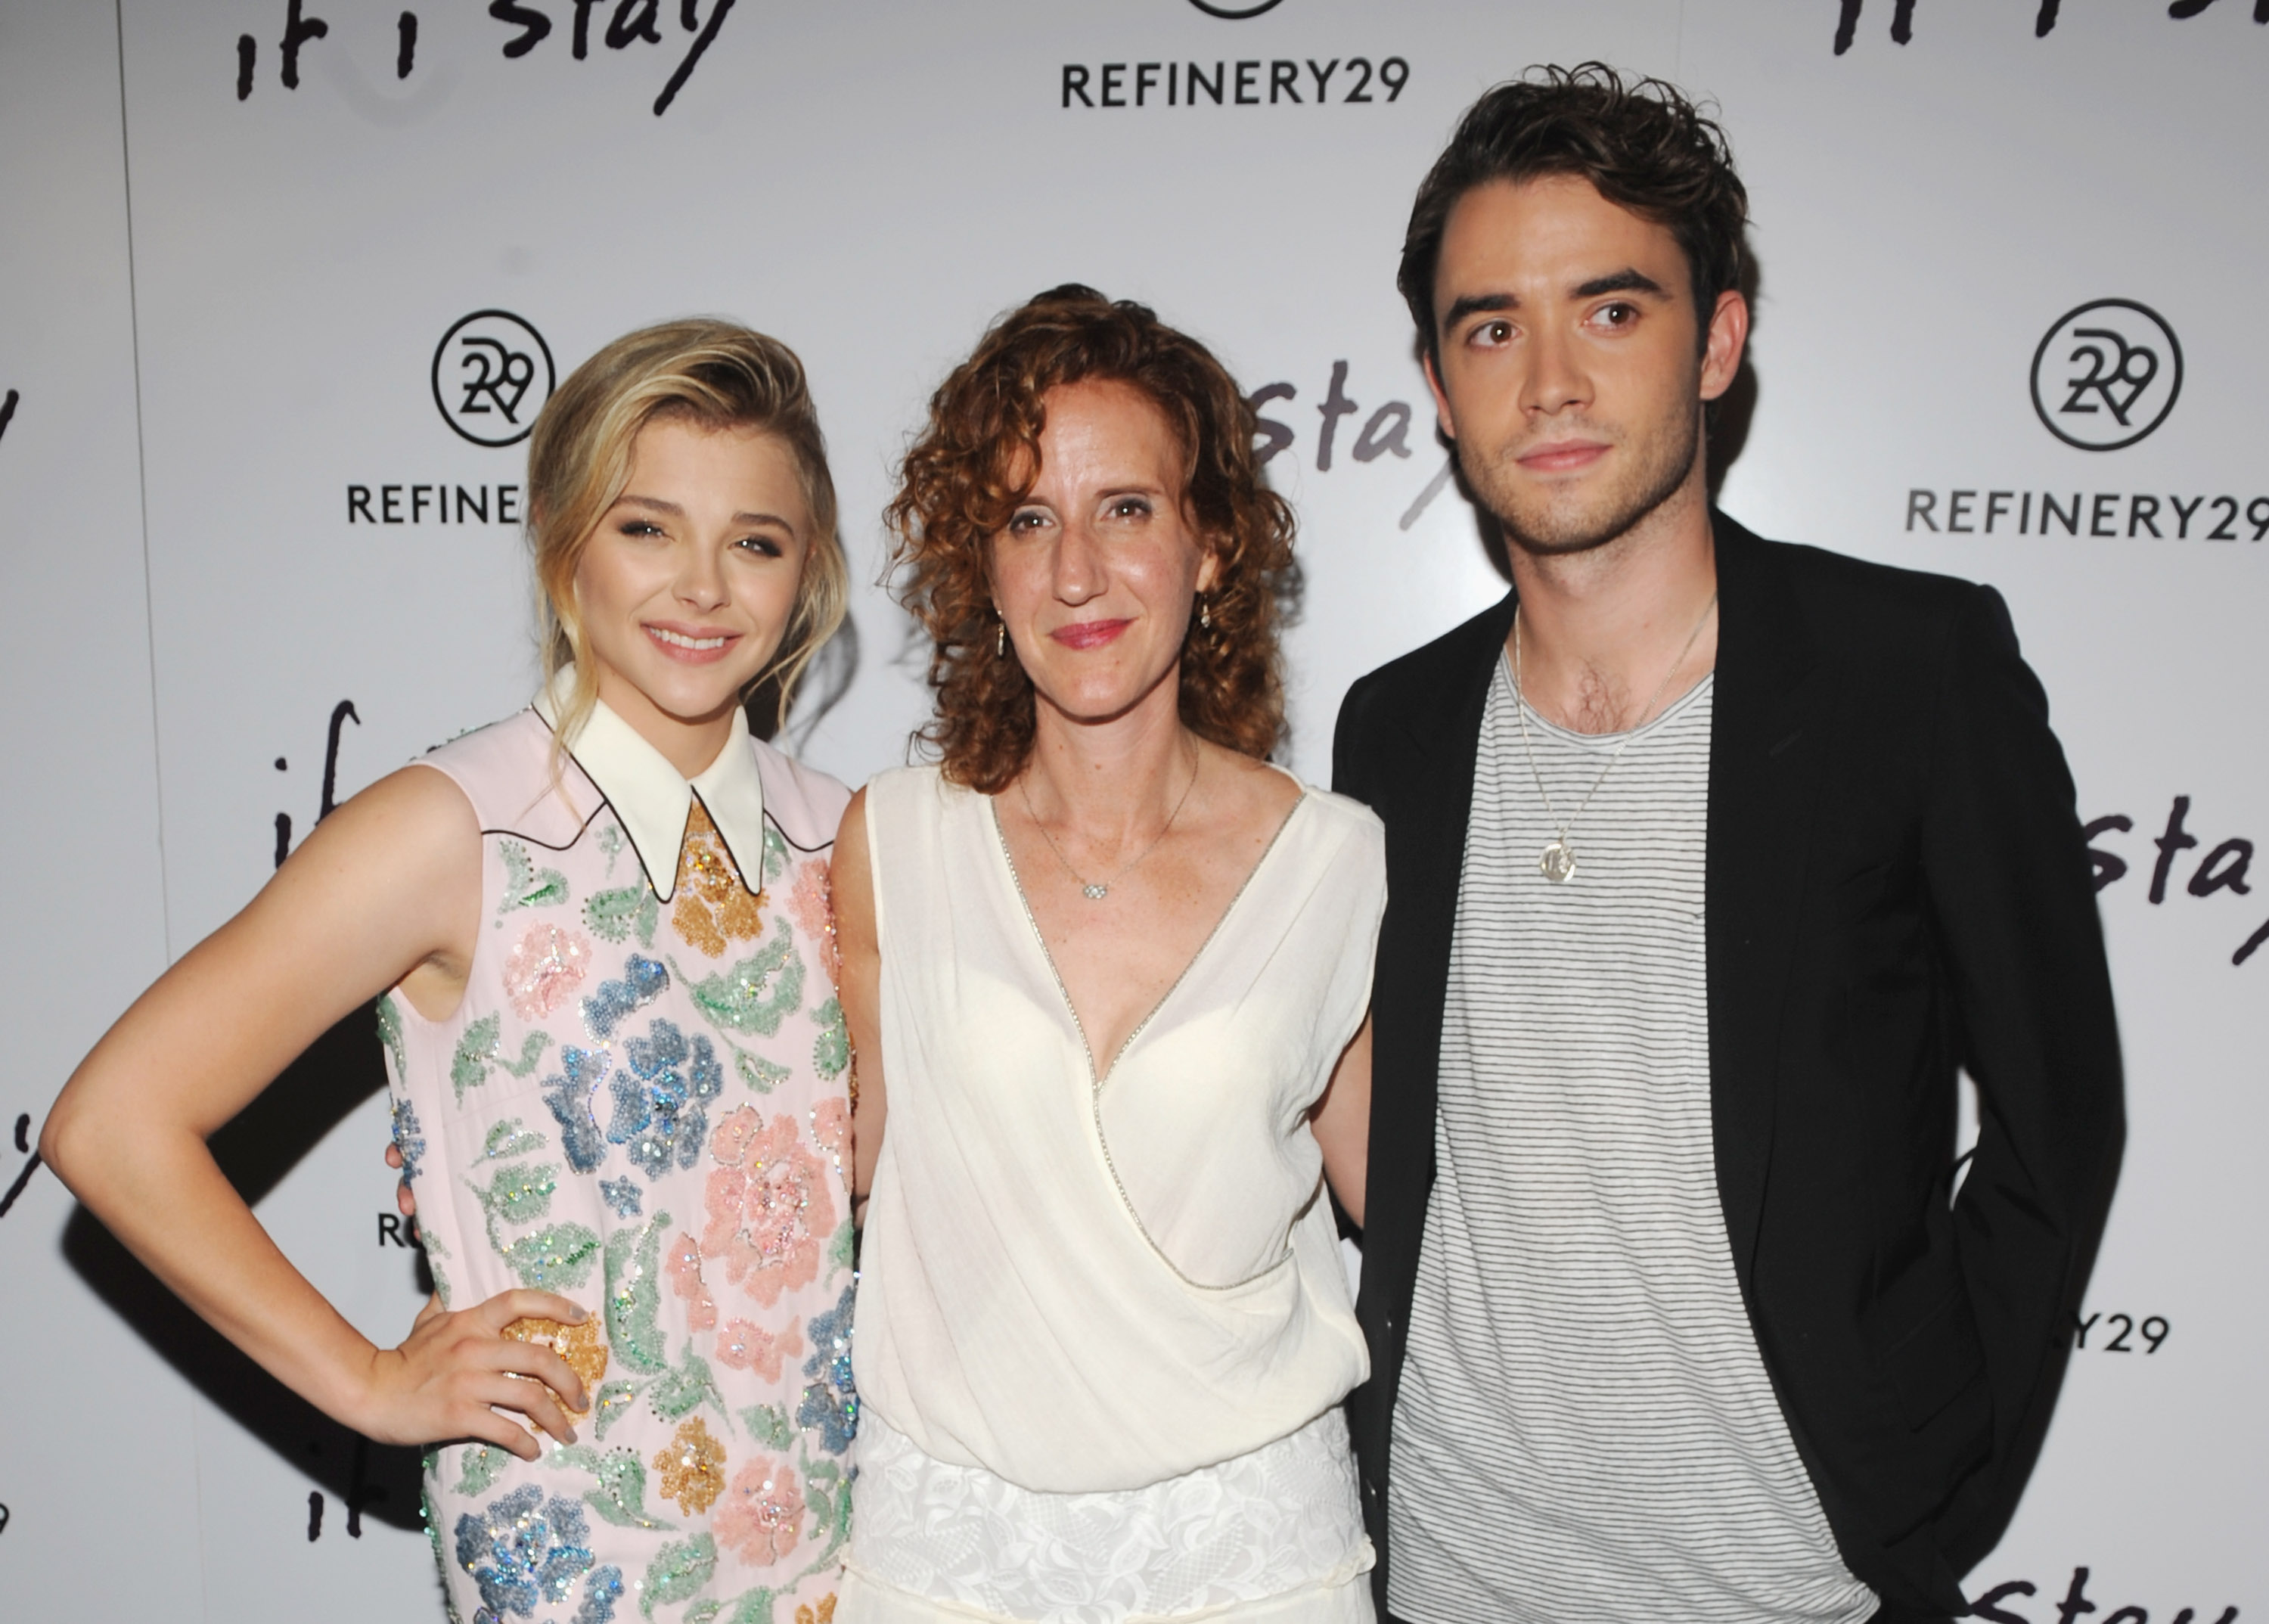 "If I Stay" New York Premiere